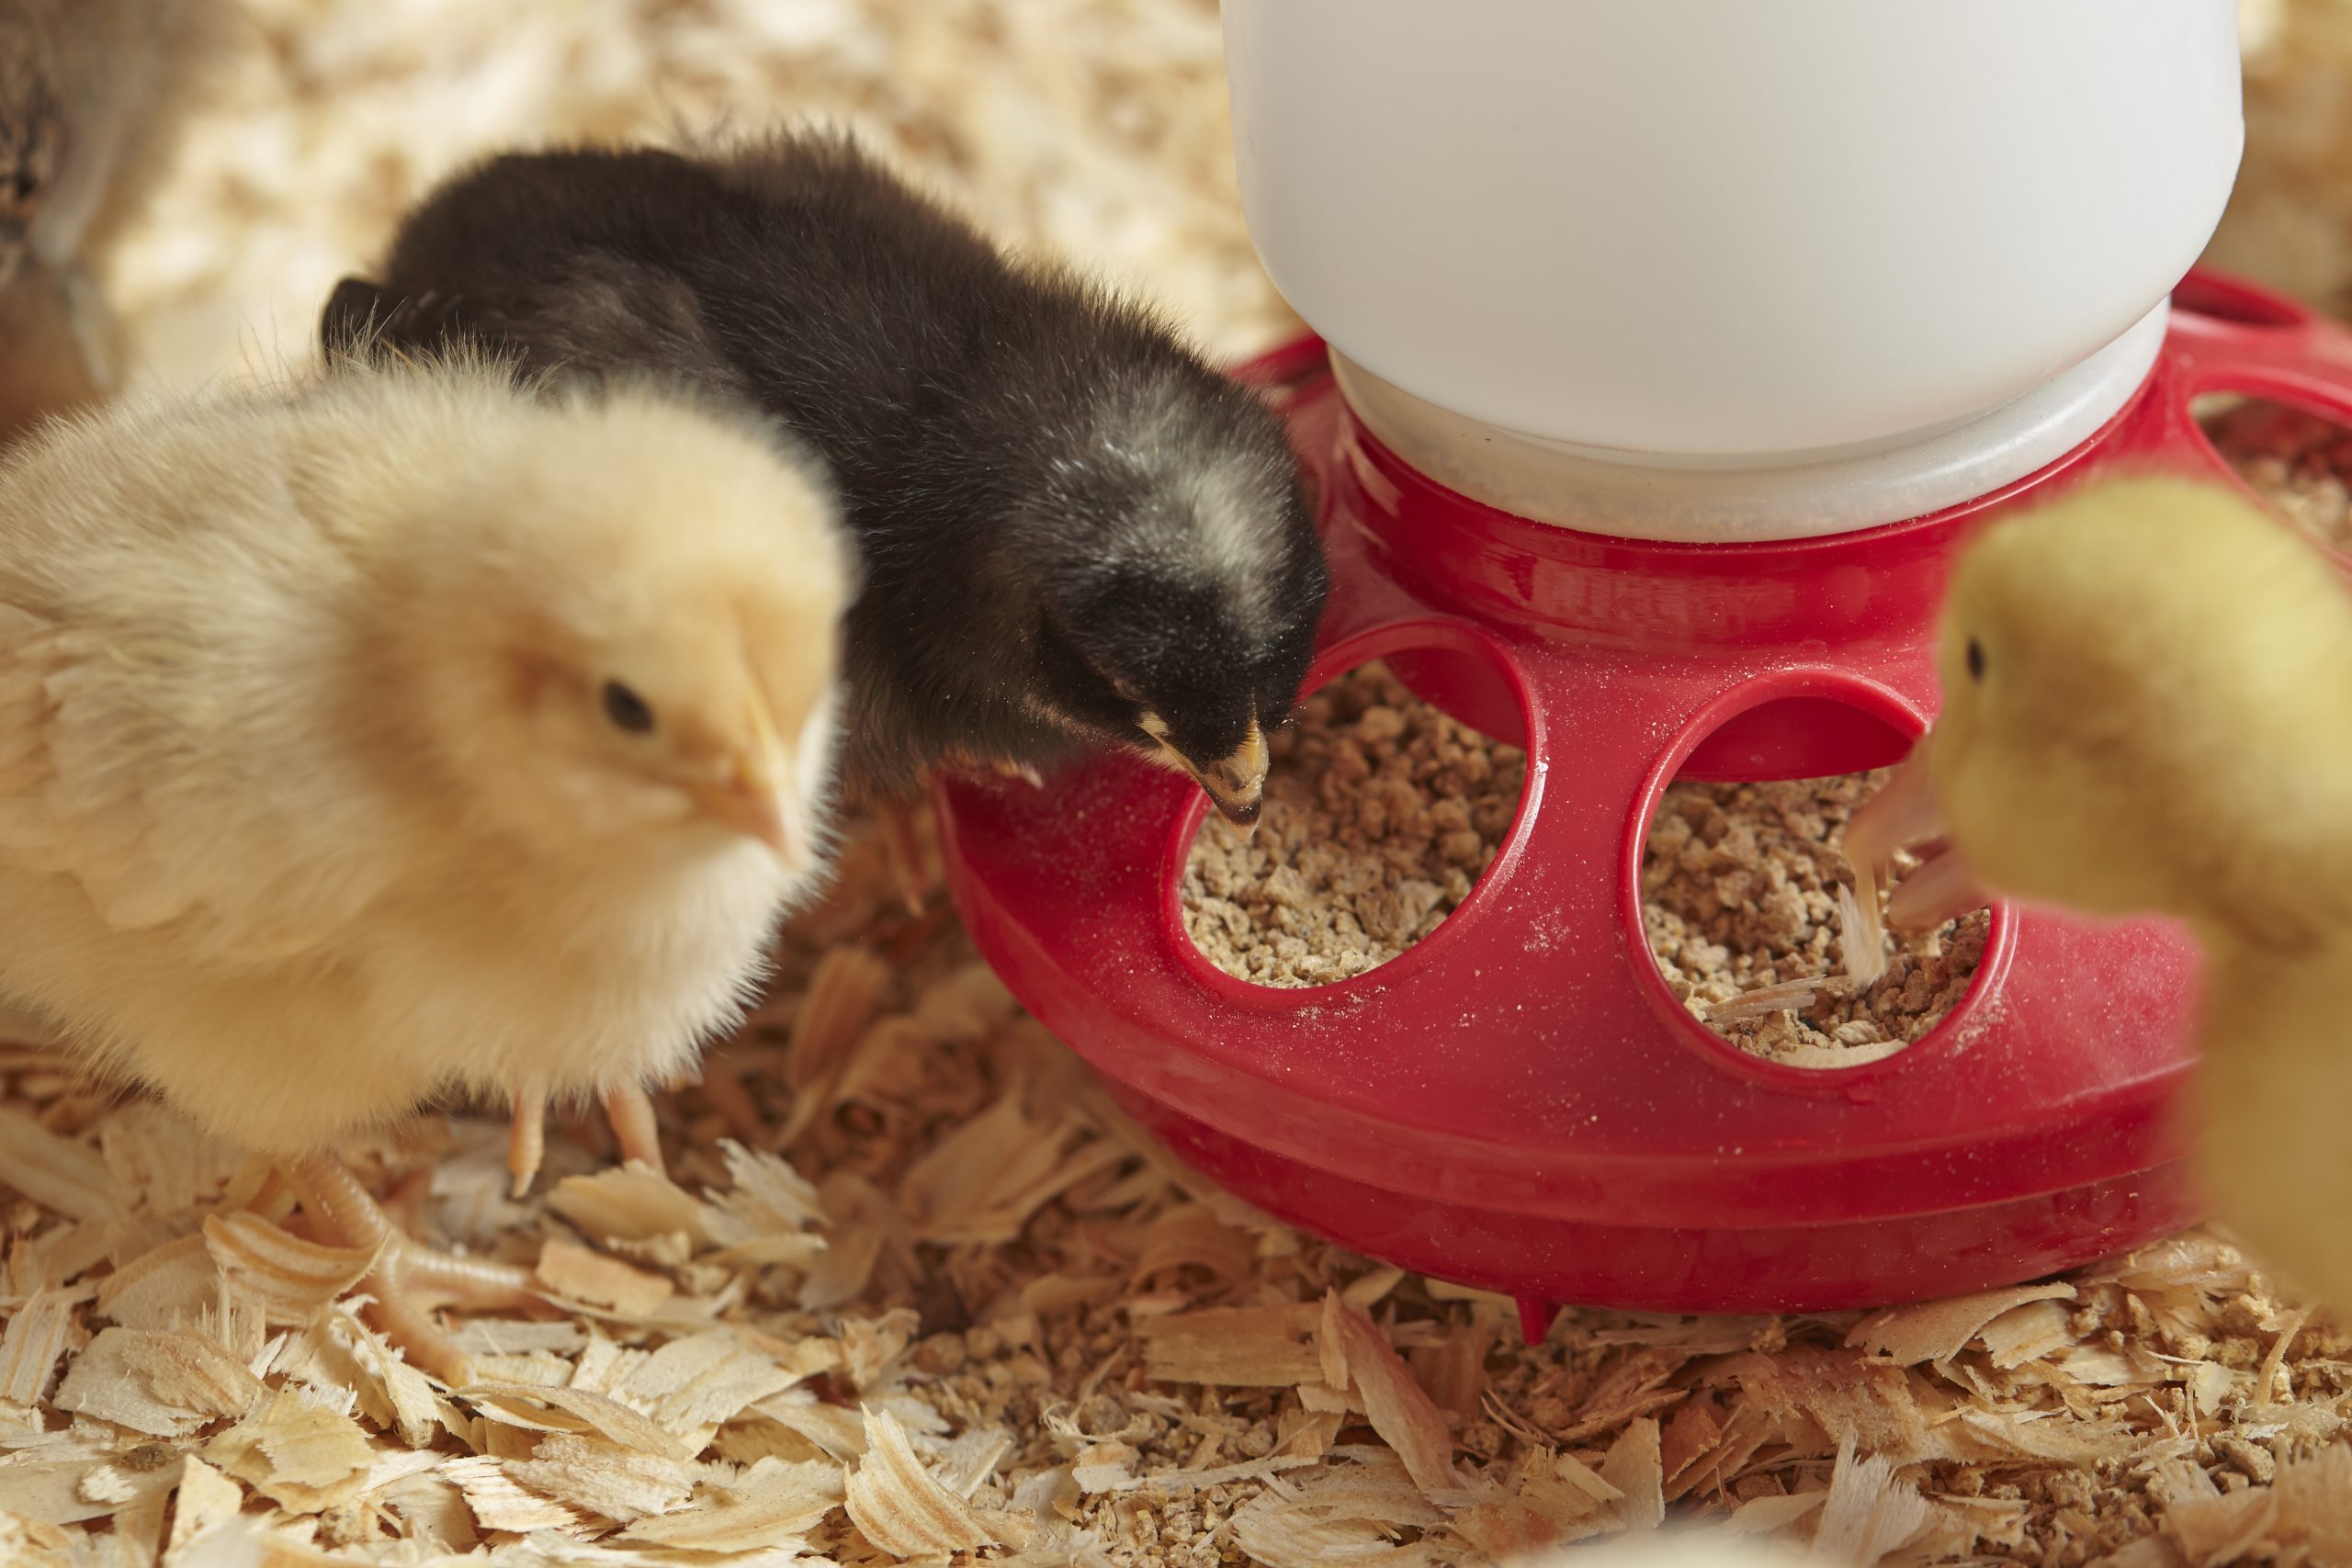 6 things to look for in a starter-grower feed. Photo: Purina